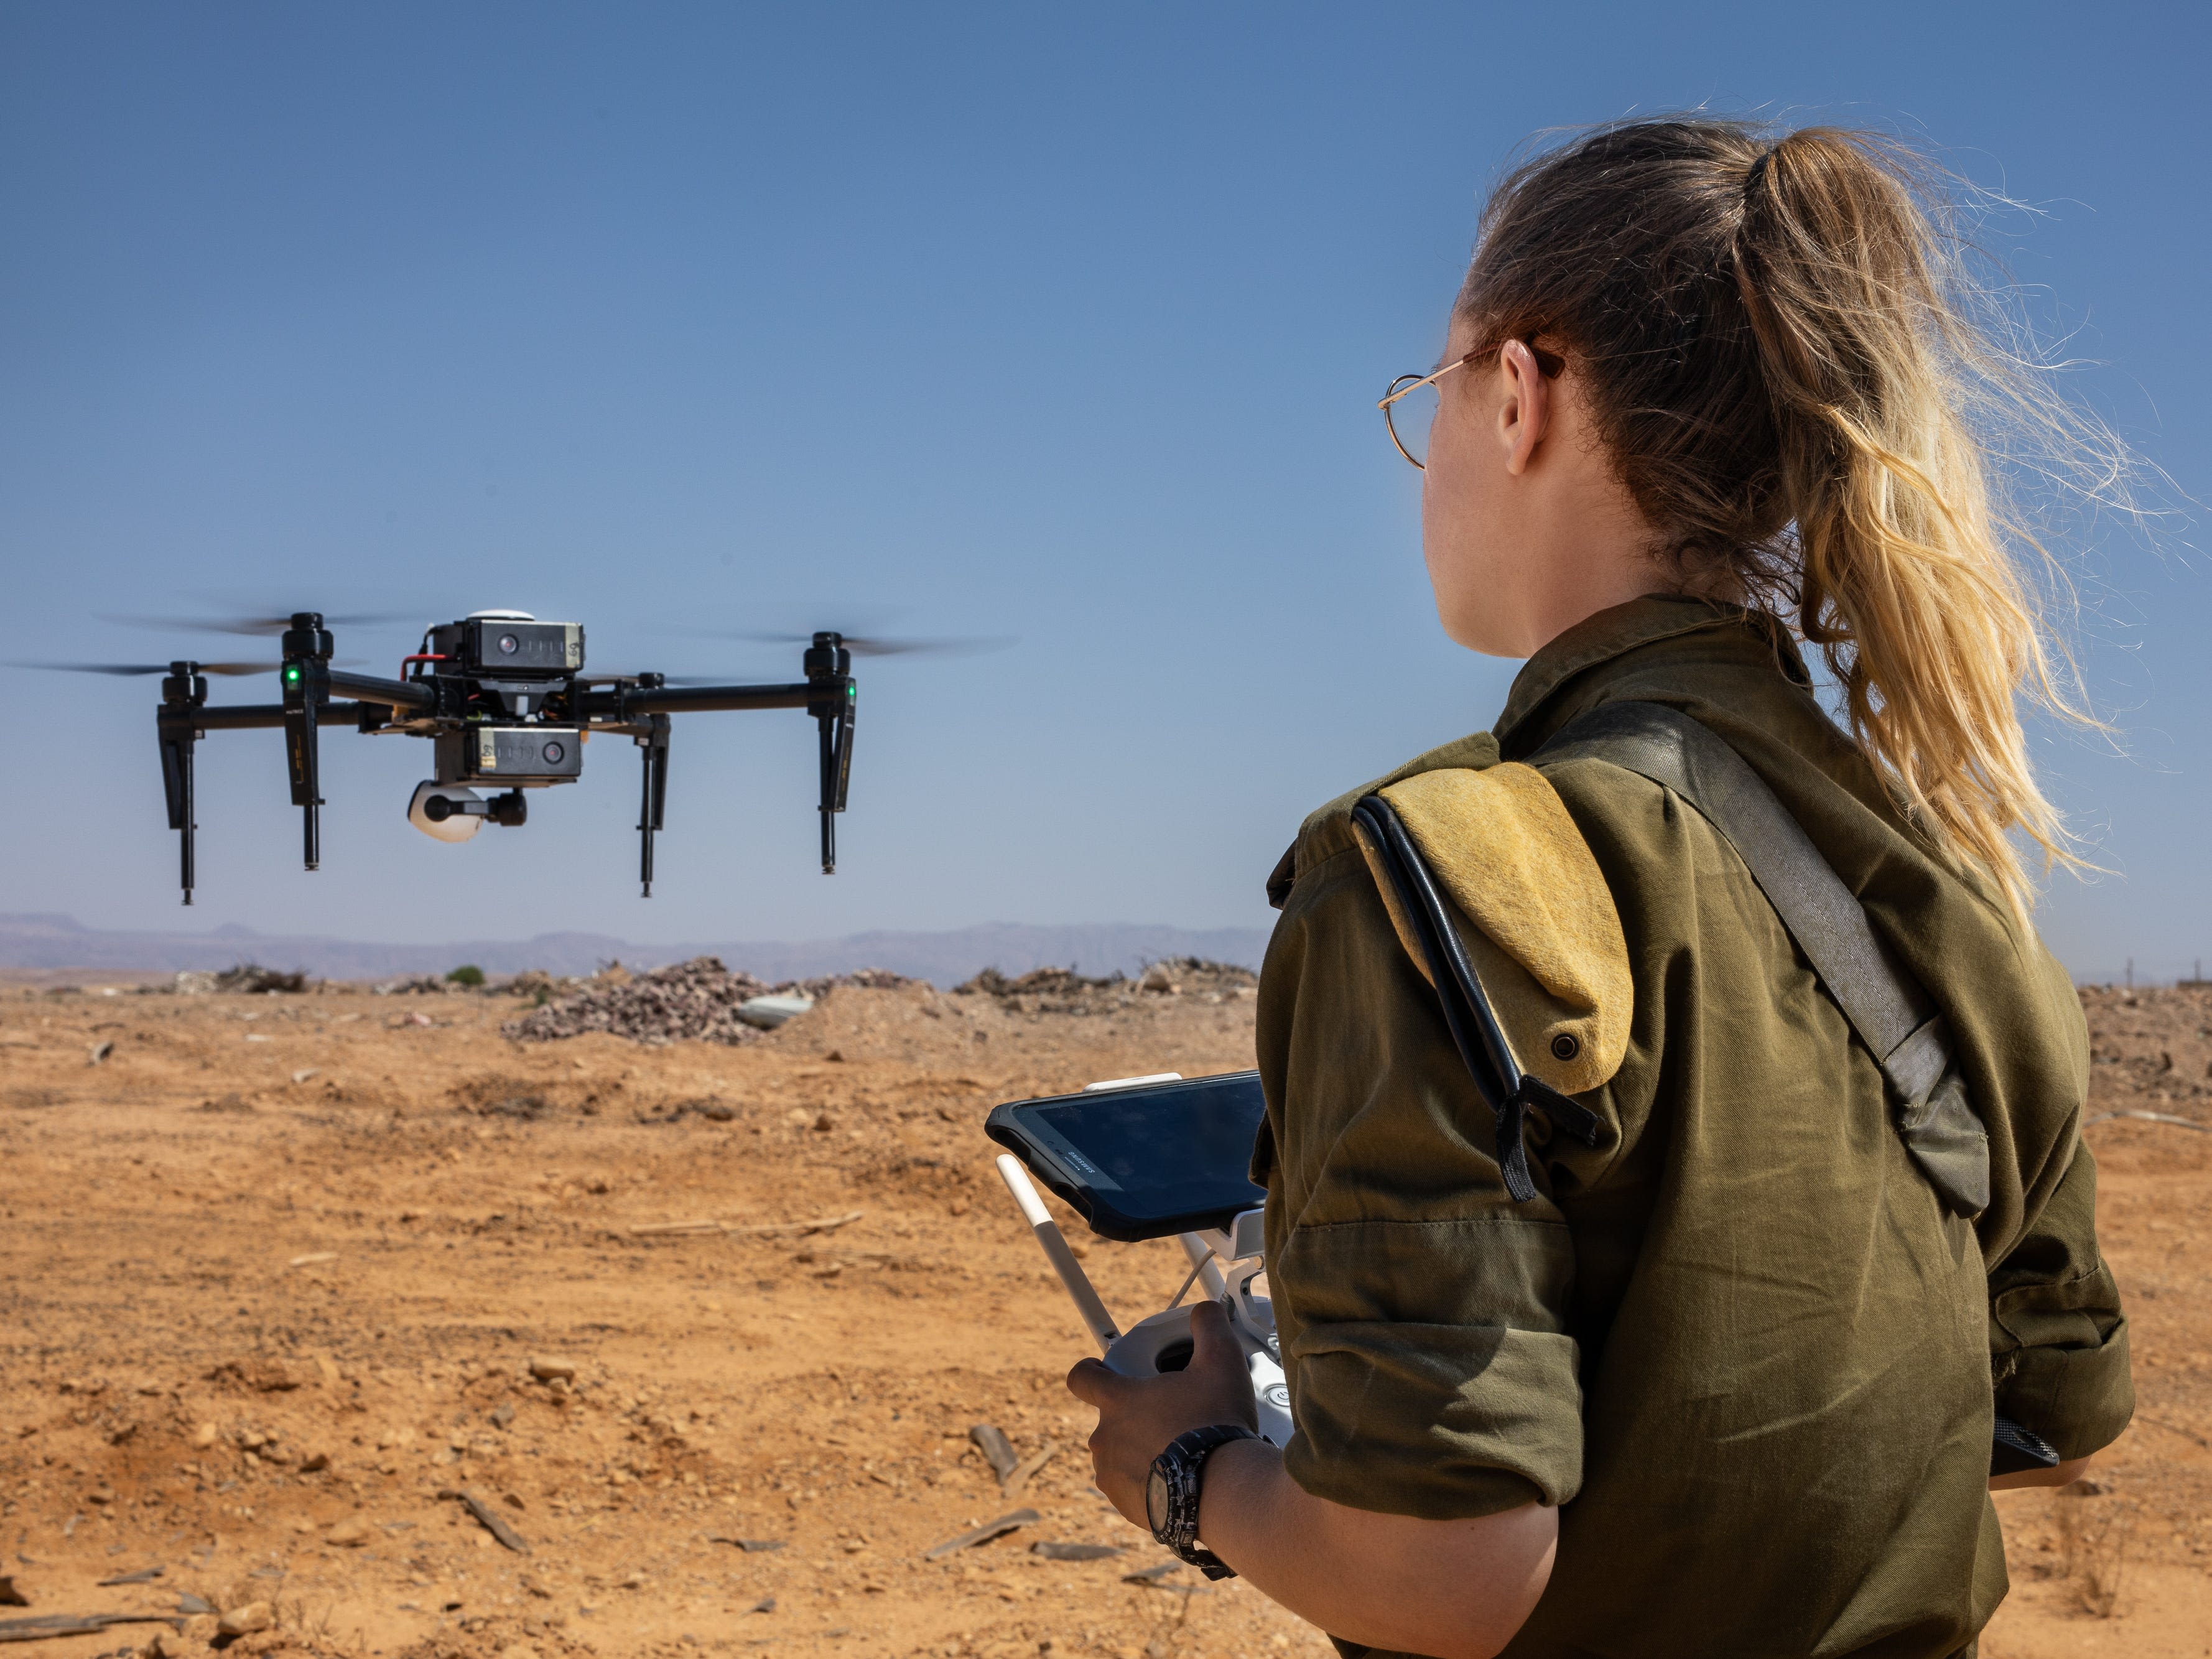 US Marine officer claims 40% of drones the IDF has shot down were their own, report says